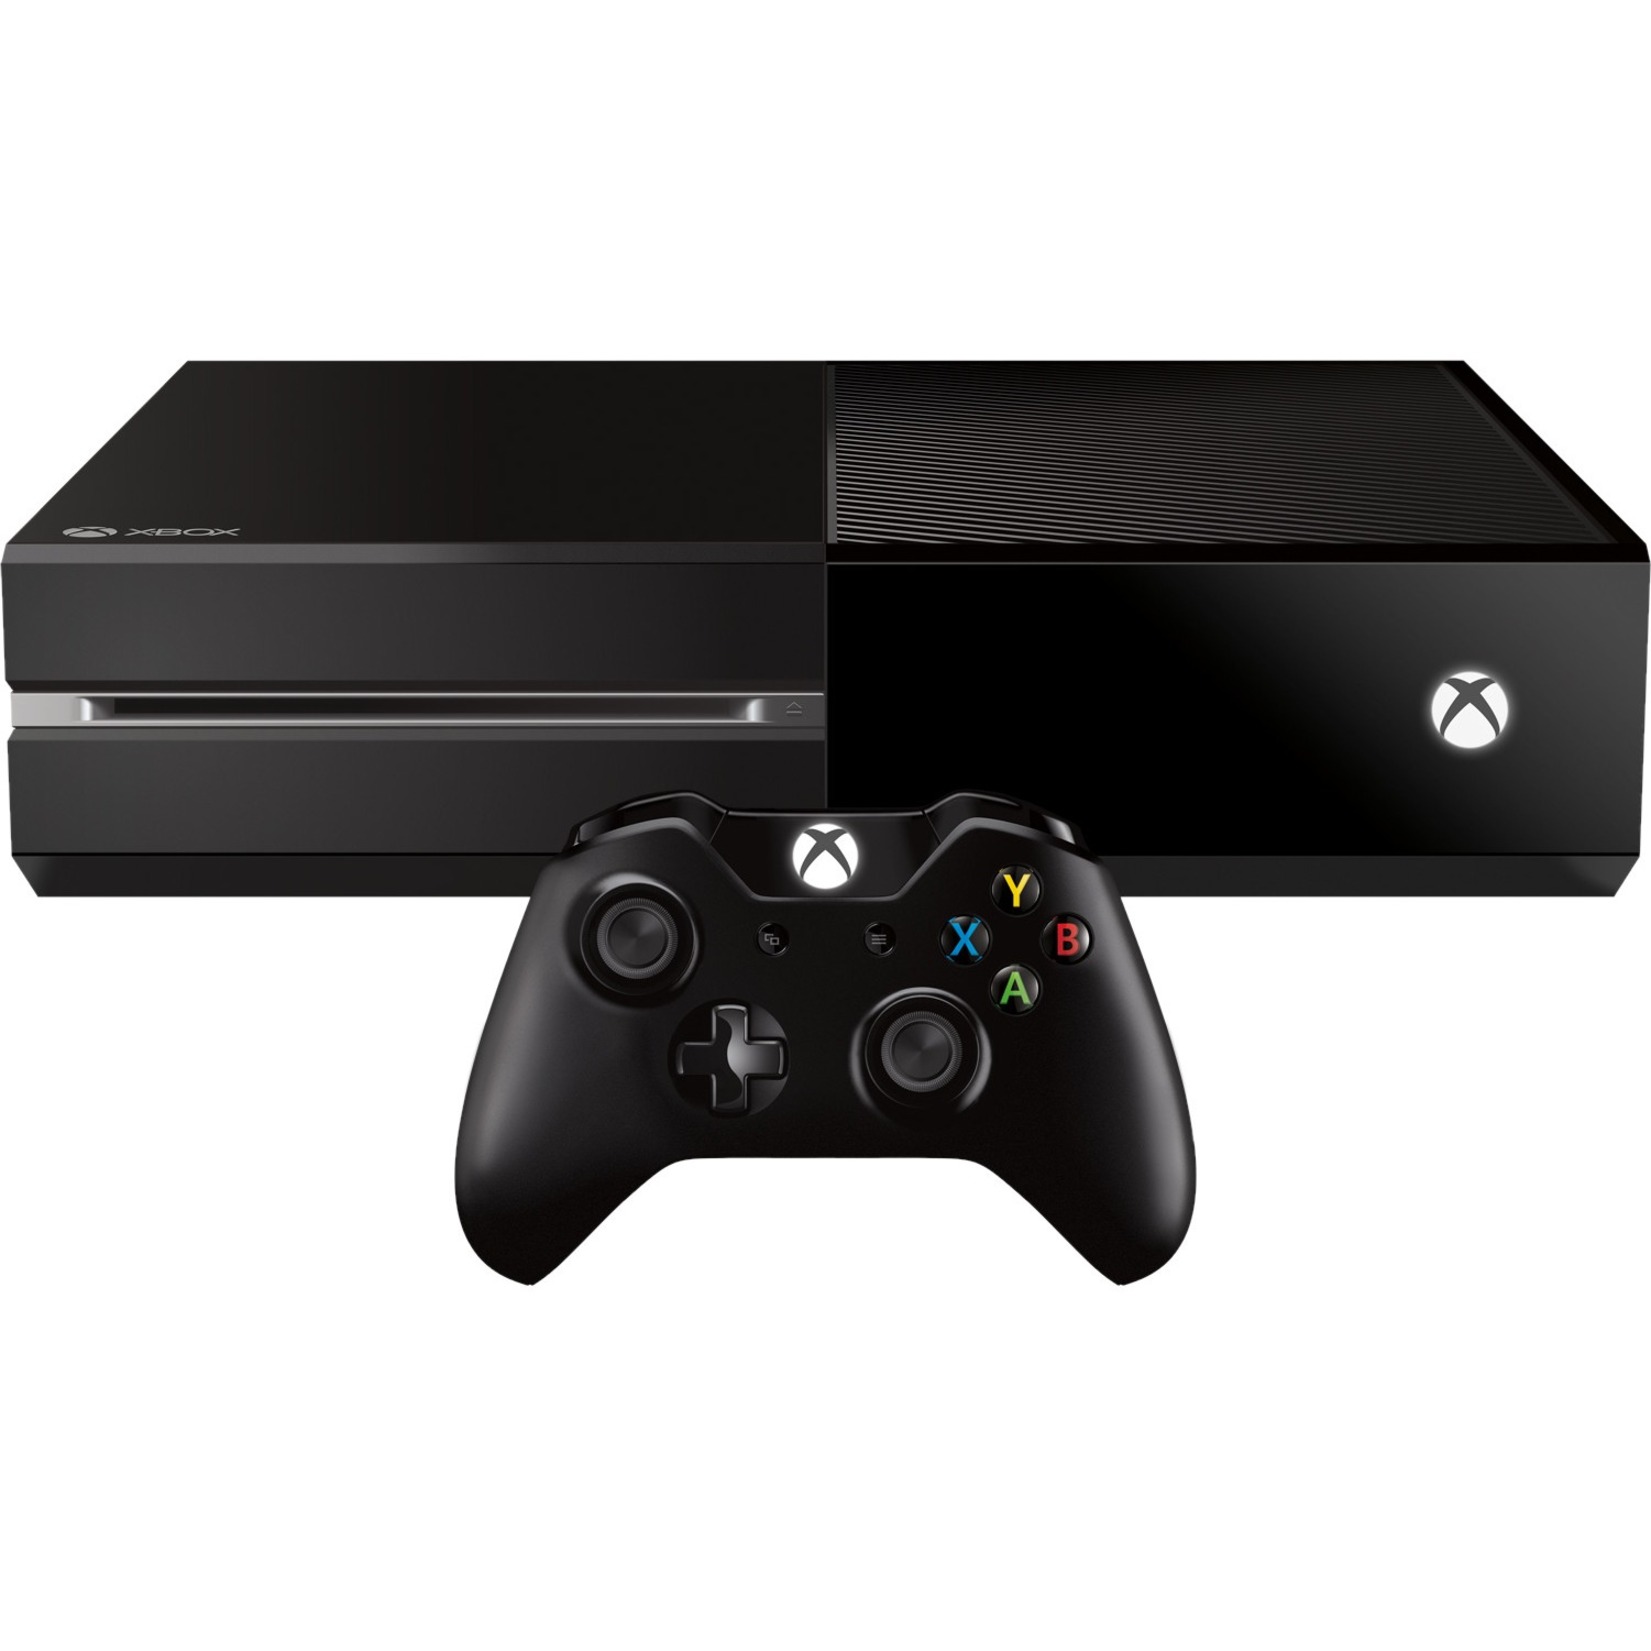 Microsoft Xbox One Gaming Console - image 1 of 4